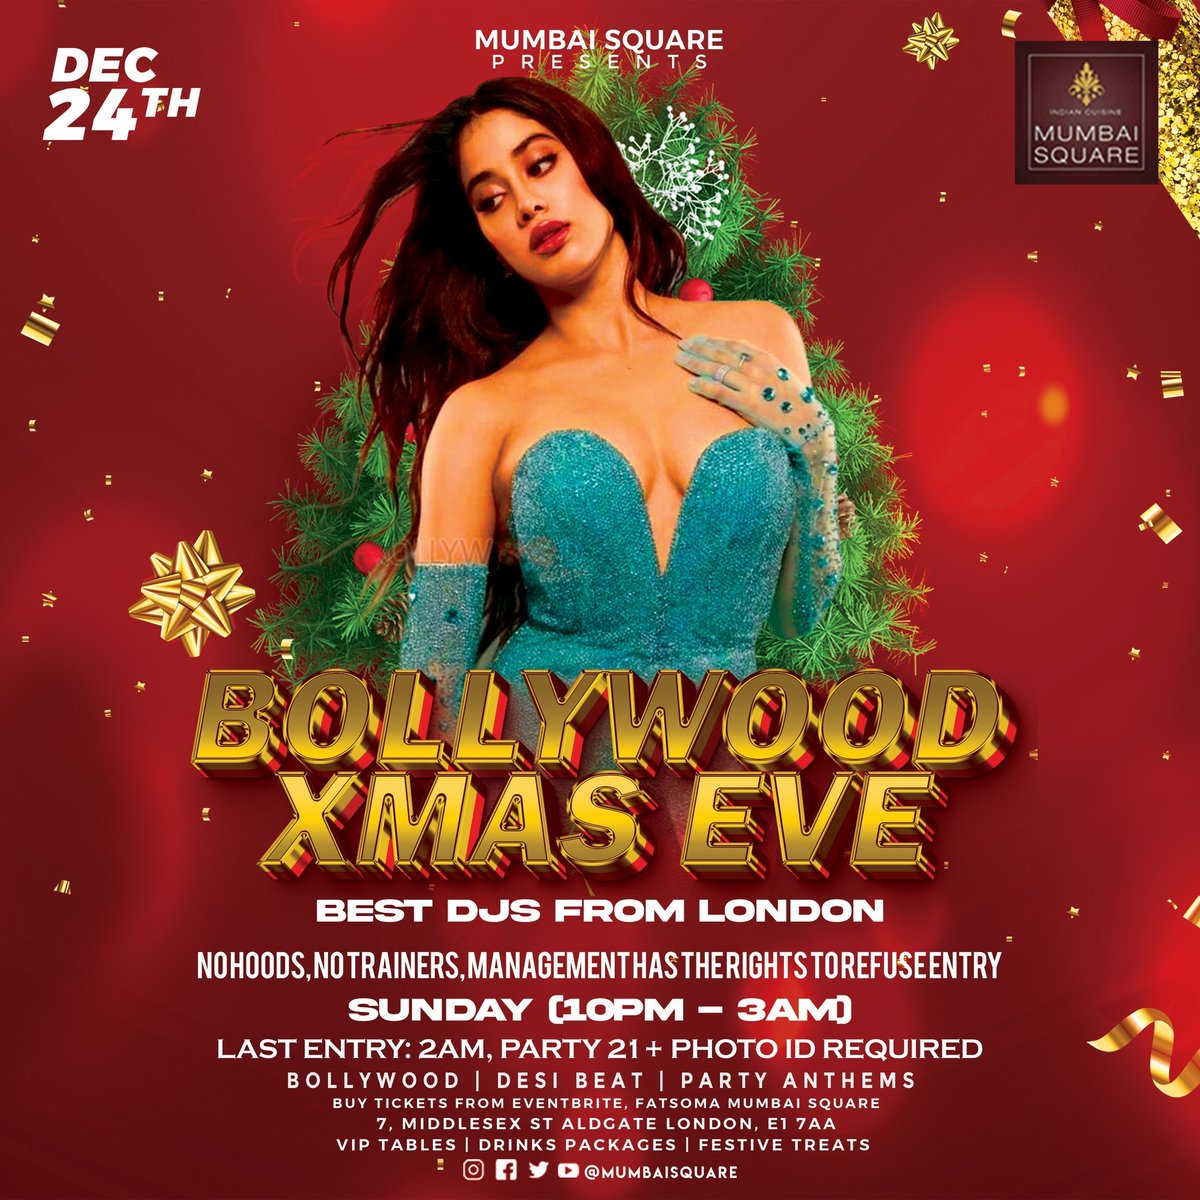 Witness crazy partying on 24th Dec Sunday @mumbaisquare
Early Birds selling out fast Grab yours today!
eventbrite.com/e/bollywood-xm…
#bollywoodparty🎉🍸 #bollywoodsongs #bollywooddance #londonnightclubs #londonparties #mumaisquare #londonclubnights #nightclubevents